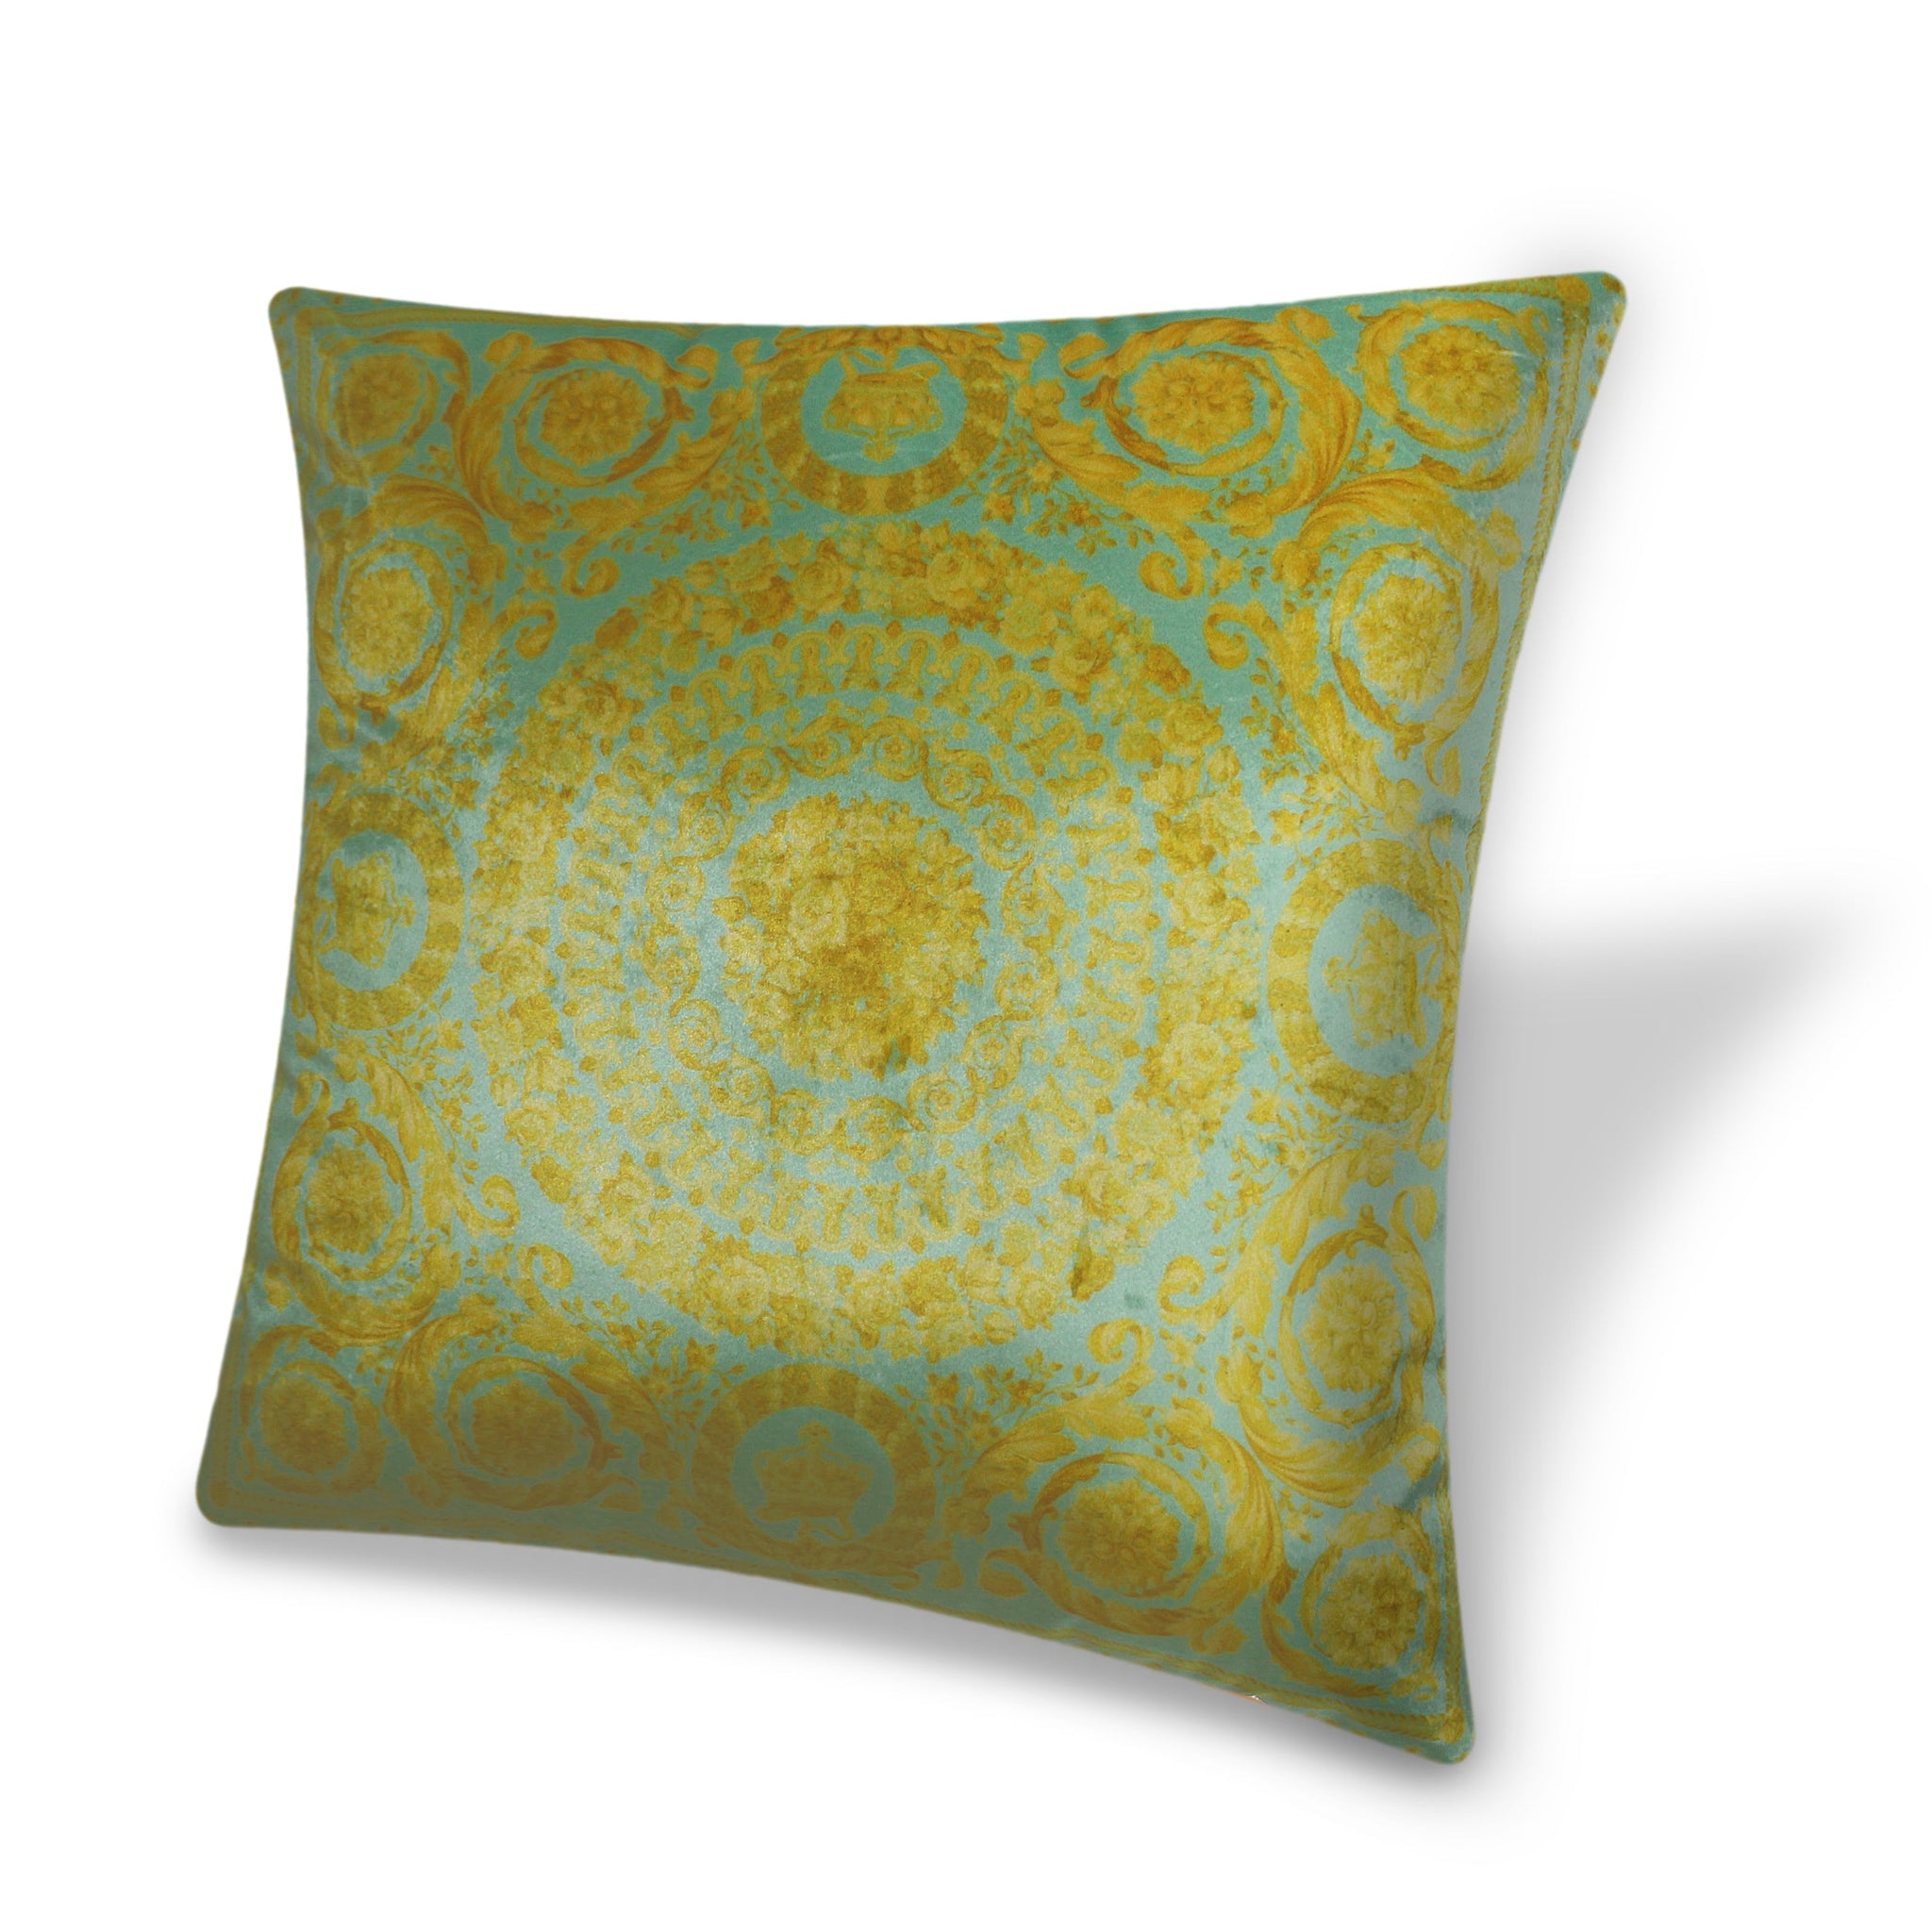 Light Green Velvet Cushion Cover Classic Baroque Style Decorative pillowcase Traditional Floral Motif Décor Throw Pillow for Sofa Chair Bedroom Living Room 45x45cm(18x18 Inches)